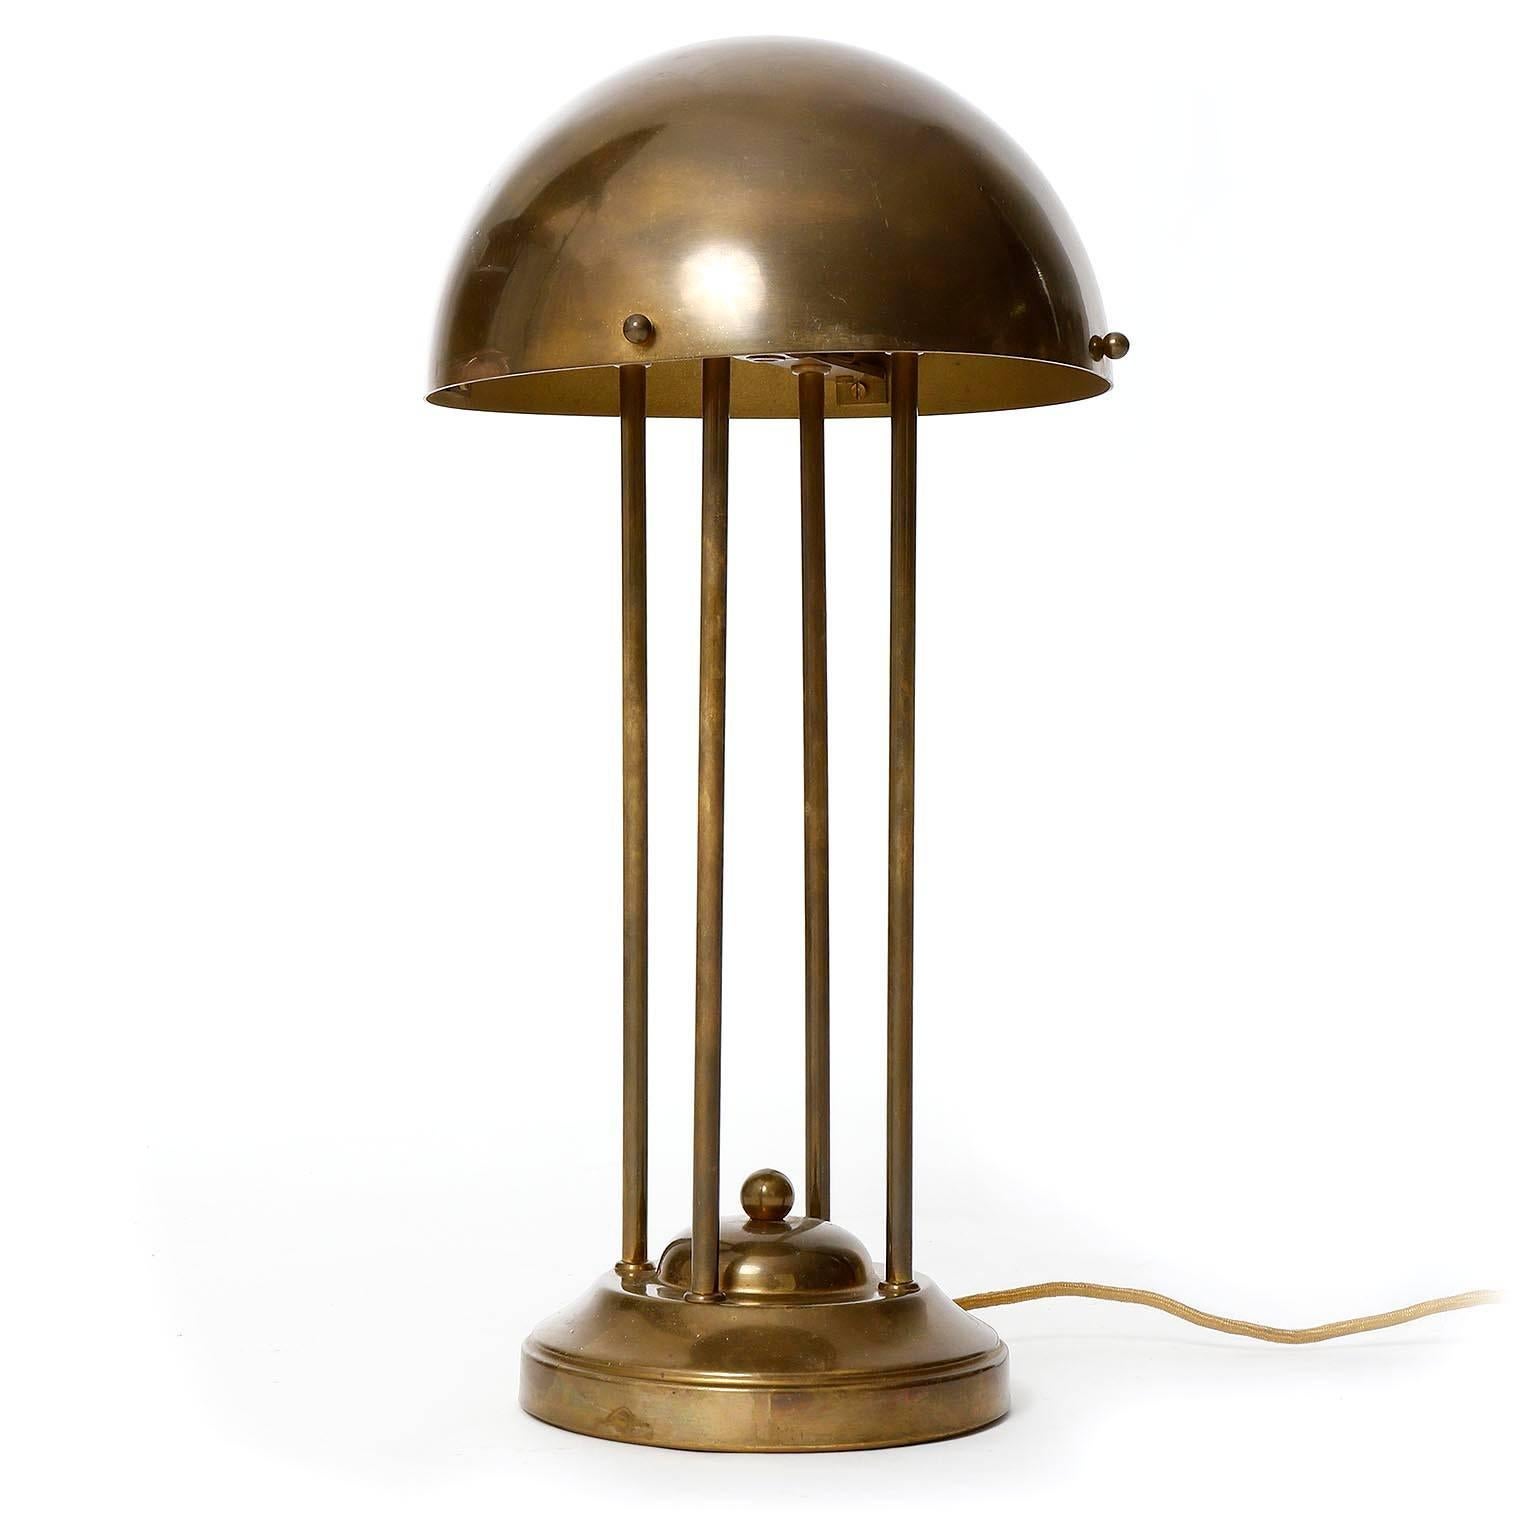 A table or desk lamp in the design of Josef Hoffmann, Austria. 
Josef Hoffmann designed those lights for the house of Dr. Henneberg in the area "Hohe Warte" in Vienna in 1900.
This light was manufactured in 1970s or later.